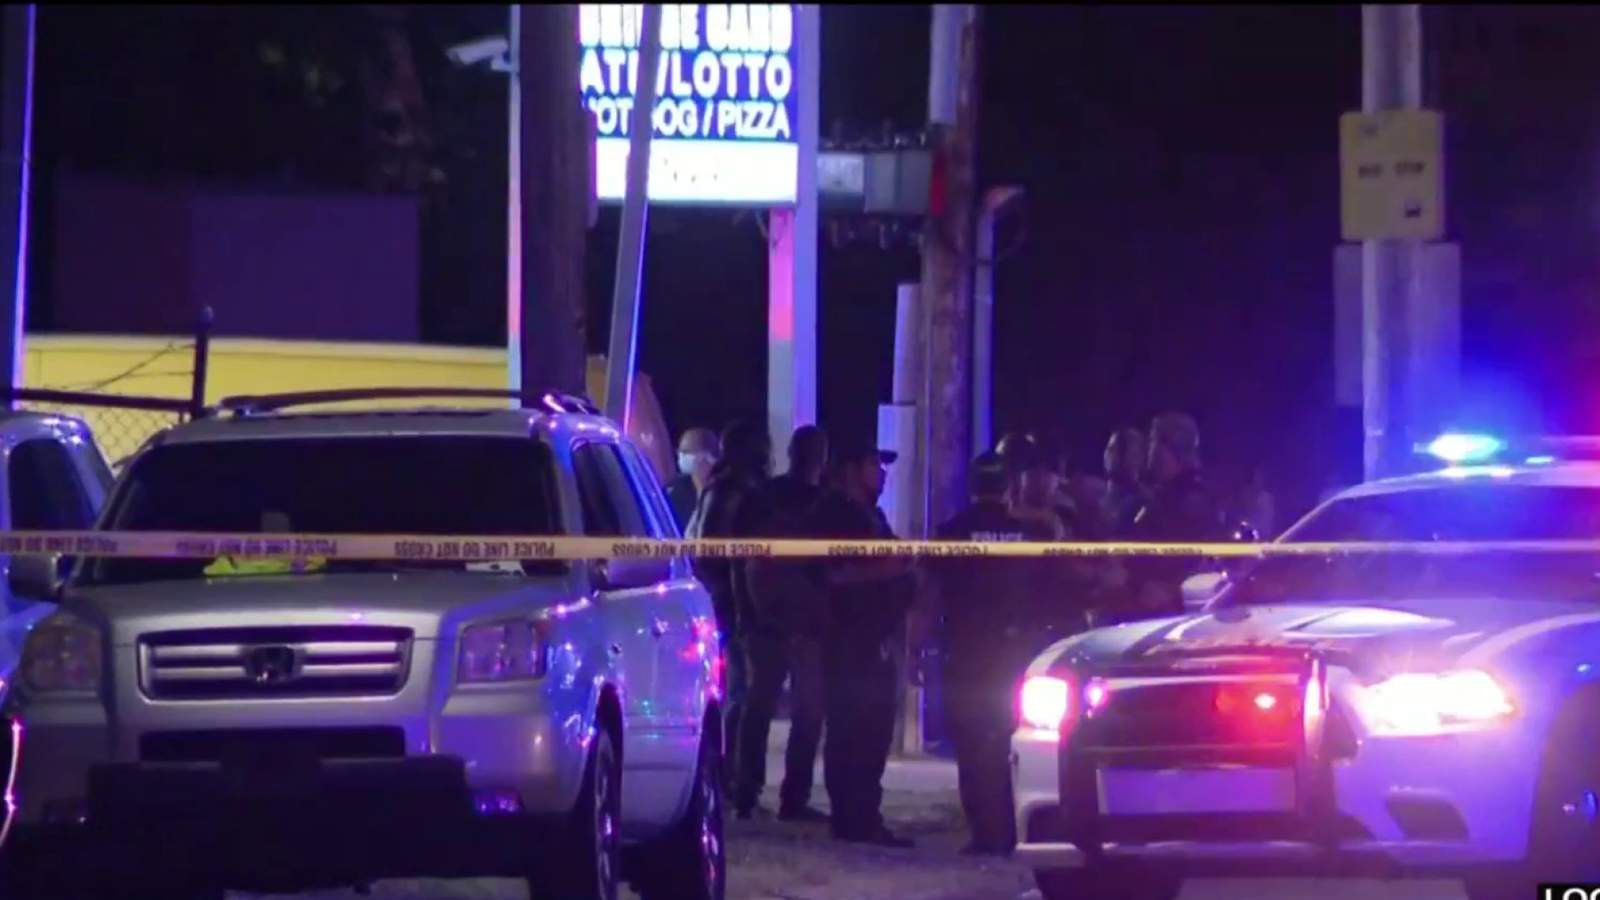 Detroit police: Man shot by officer armed, selling drugs at gas station